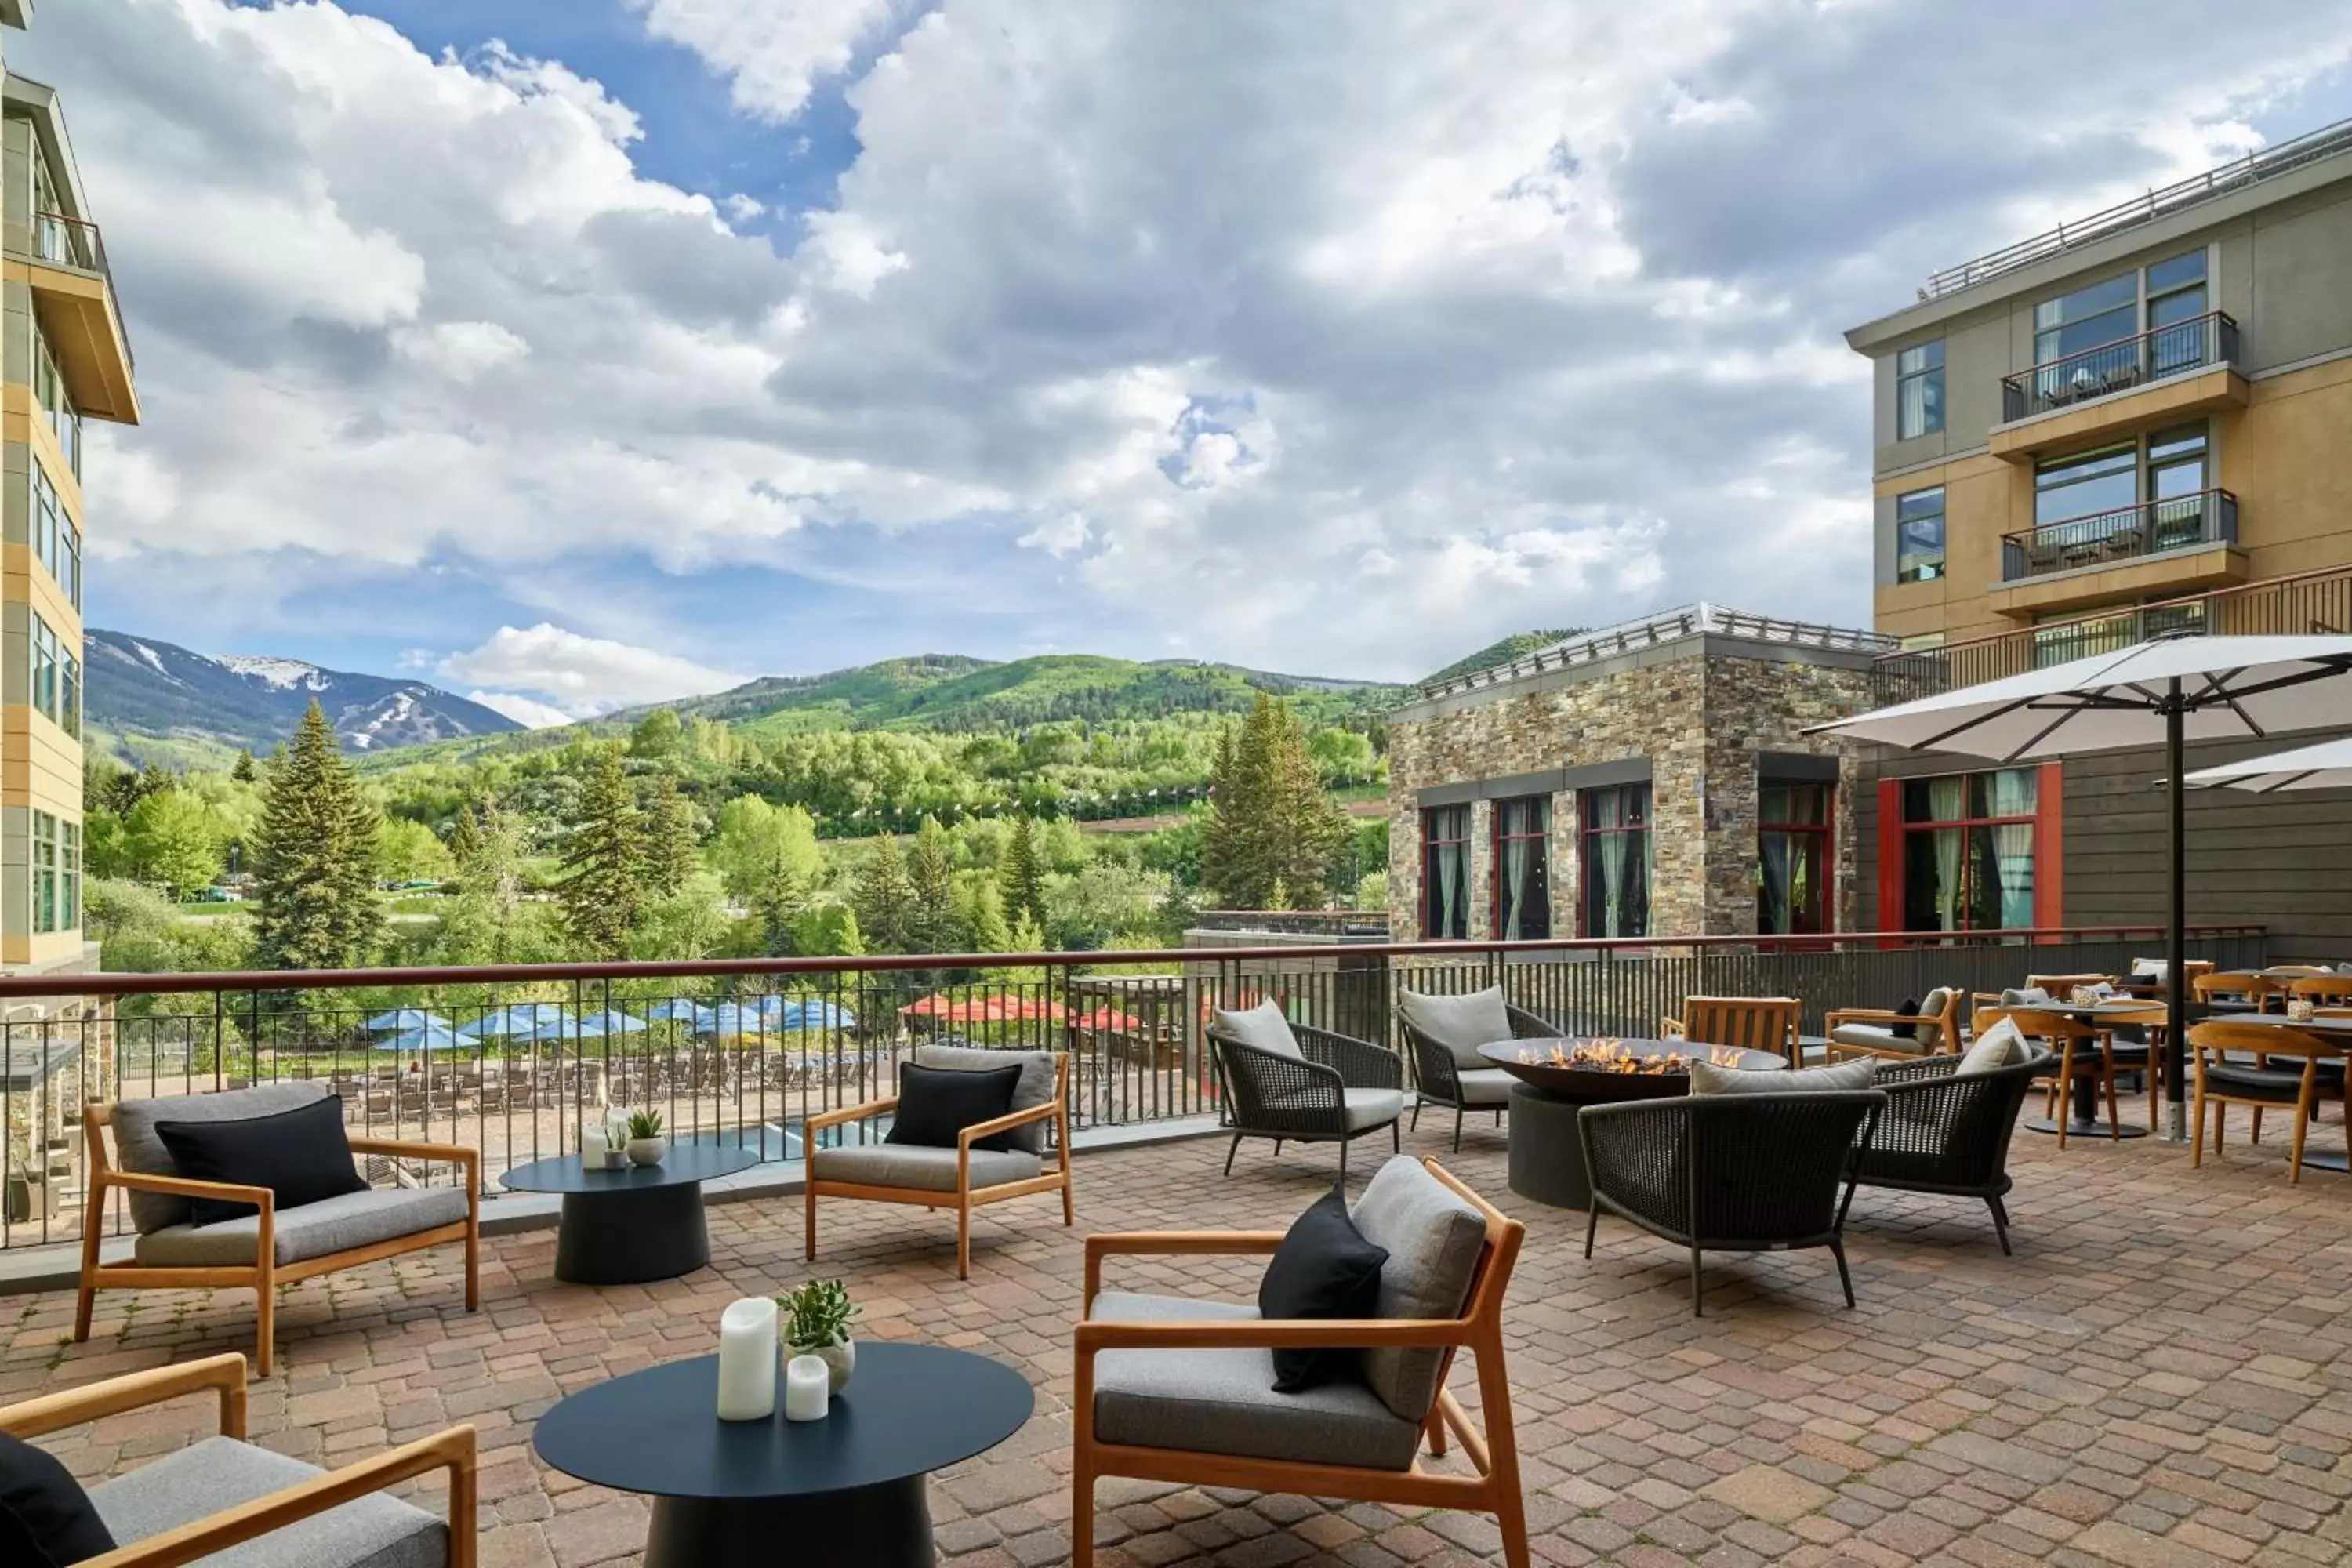 Lobby or reception in The Westin Riverfront Resort & Spa, Avon, Vail Valley